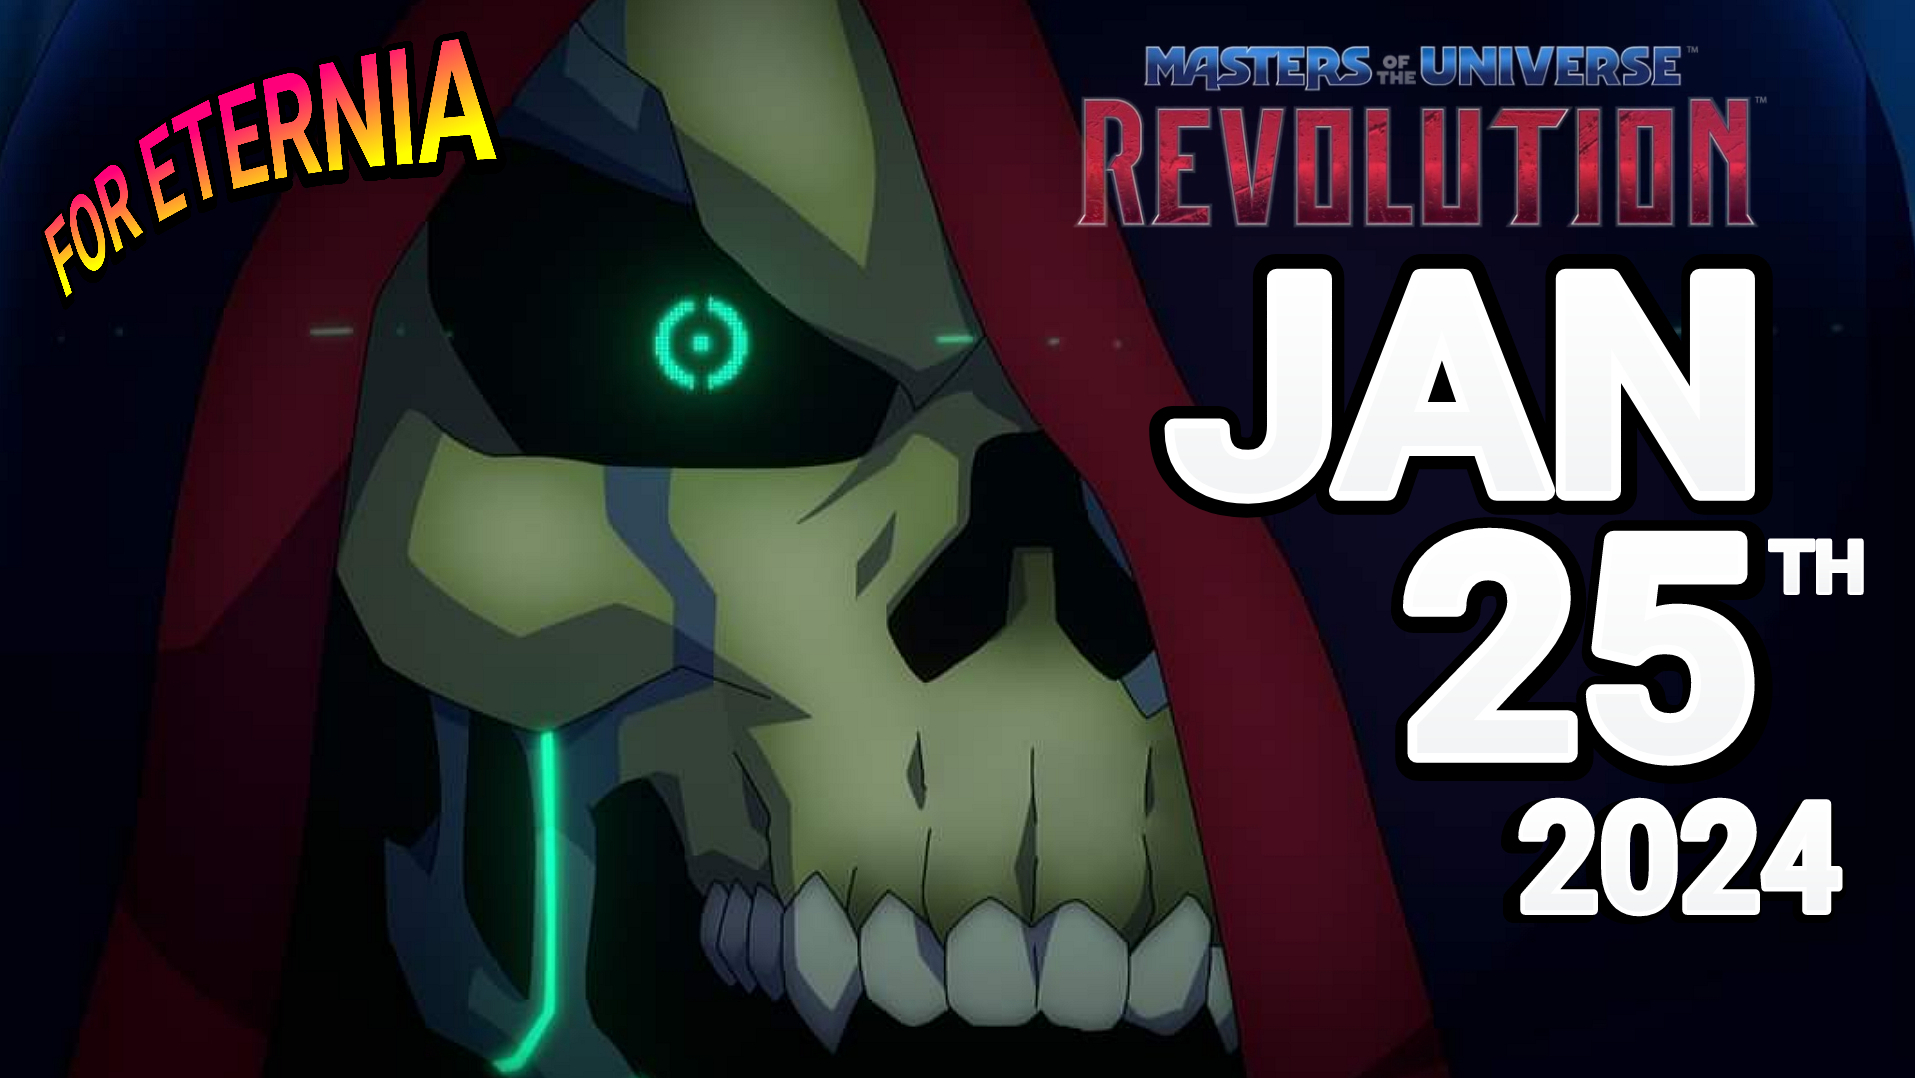 ”Masters of the Universe: Revolution” Release Date is Announced: January 25th 2024!